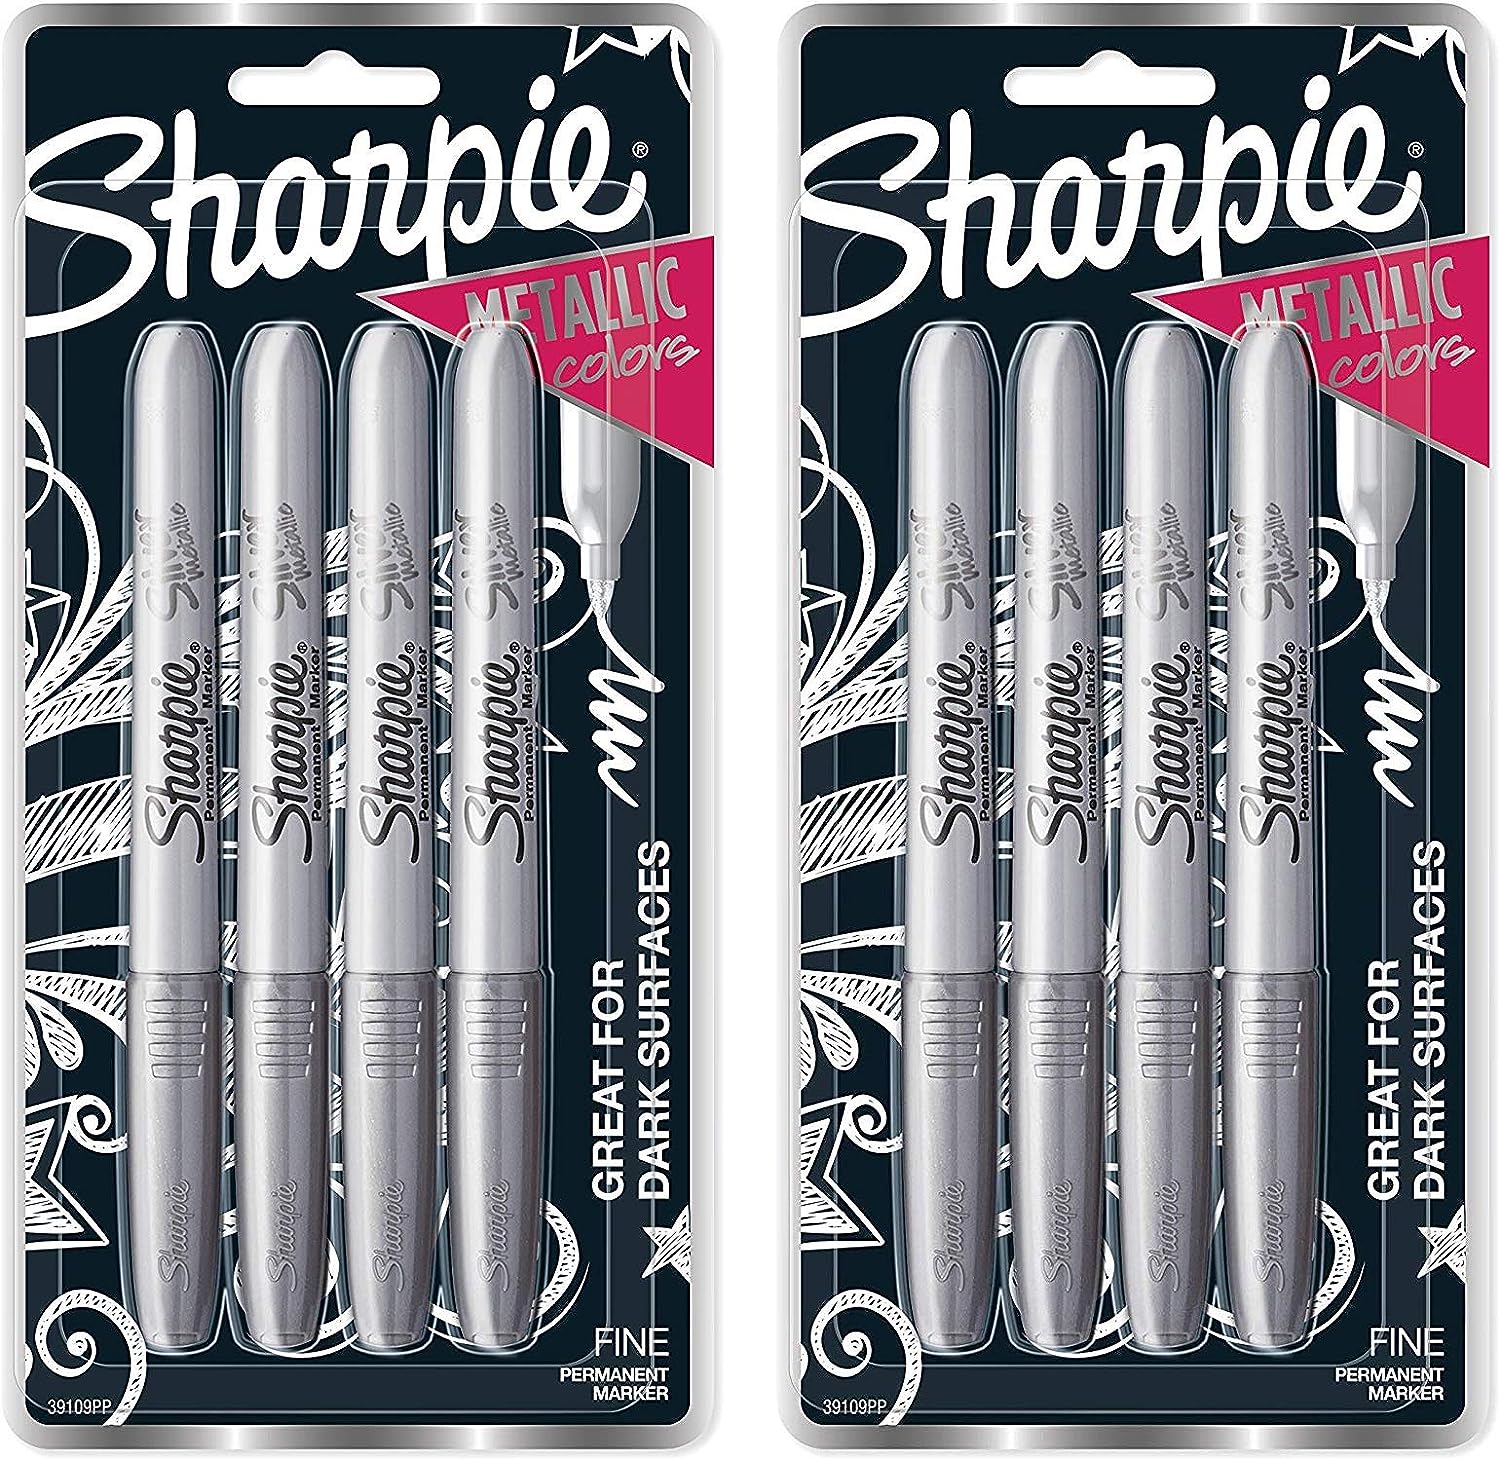 Sharpie 39109PP Metallic Permanent Markers, Fine Point, Silver, 4 Count, 2 Pac